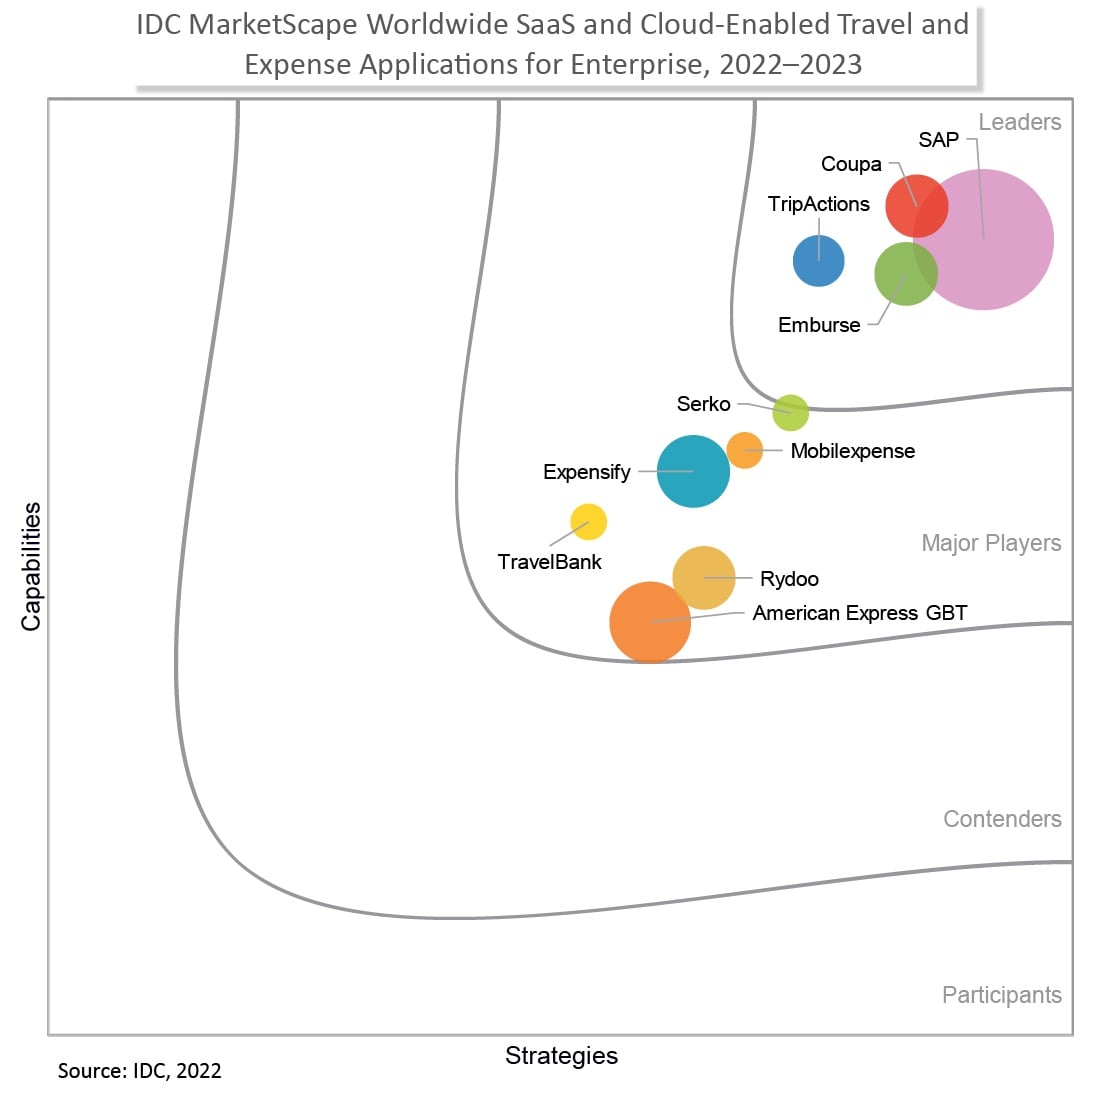 IDC travel and expense grid showing SAP Concur as a leader